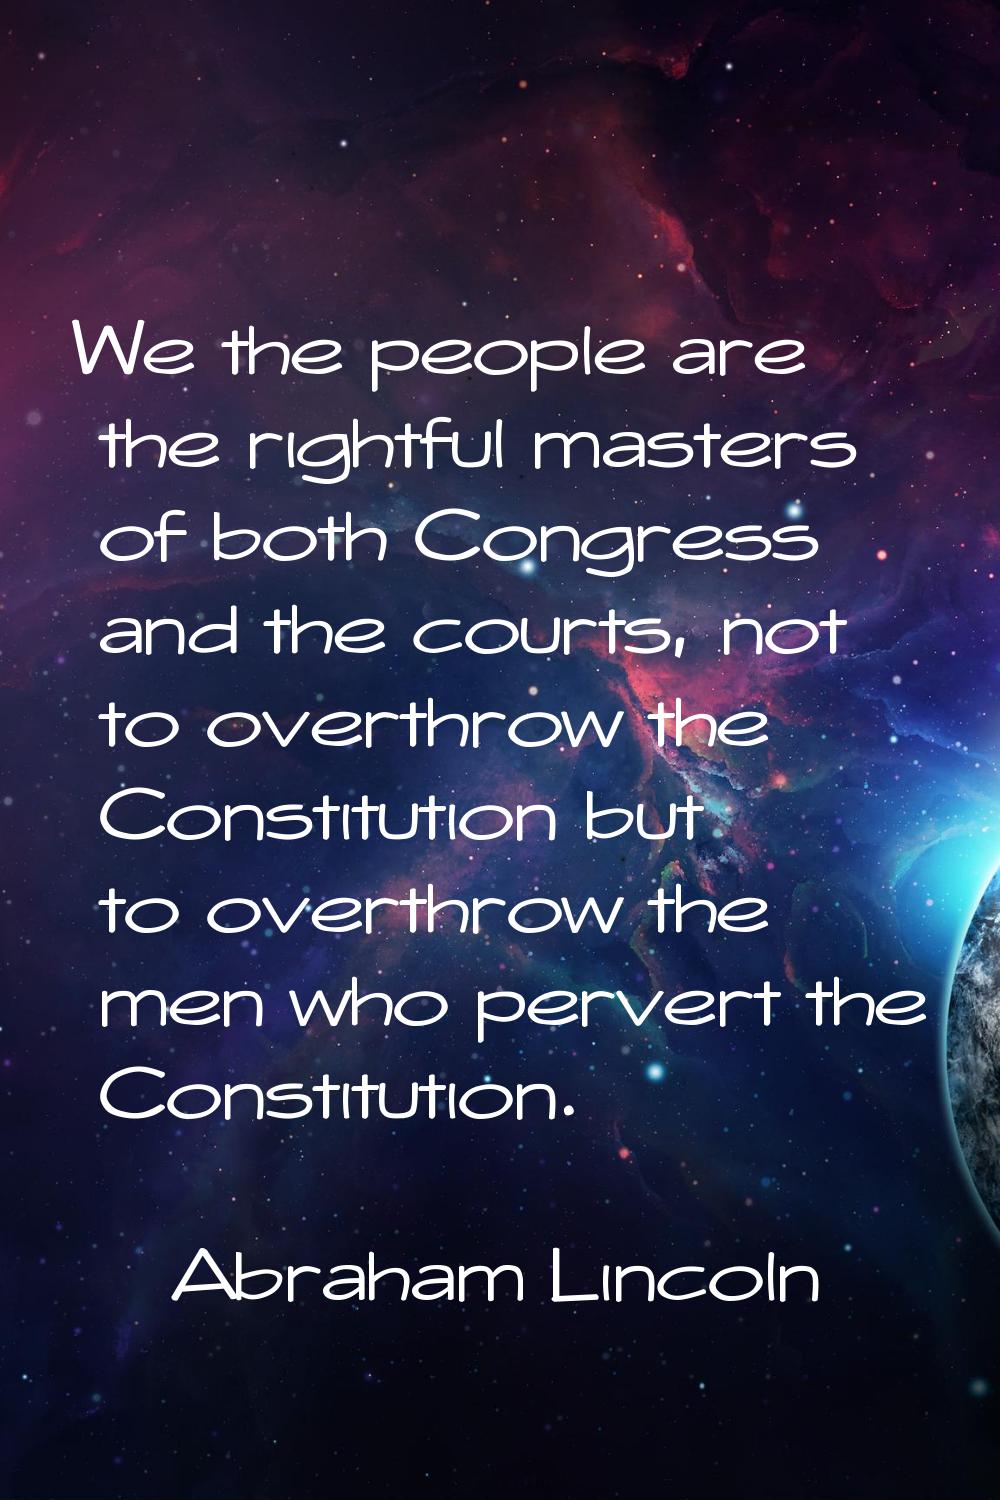 We the people are the rightful masters of both Congress and the courts, not to overthrow the Consti